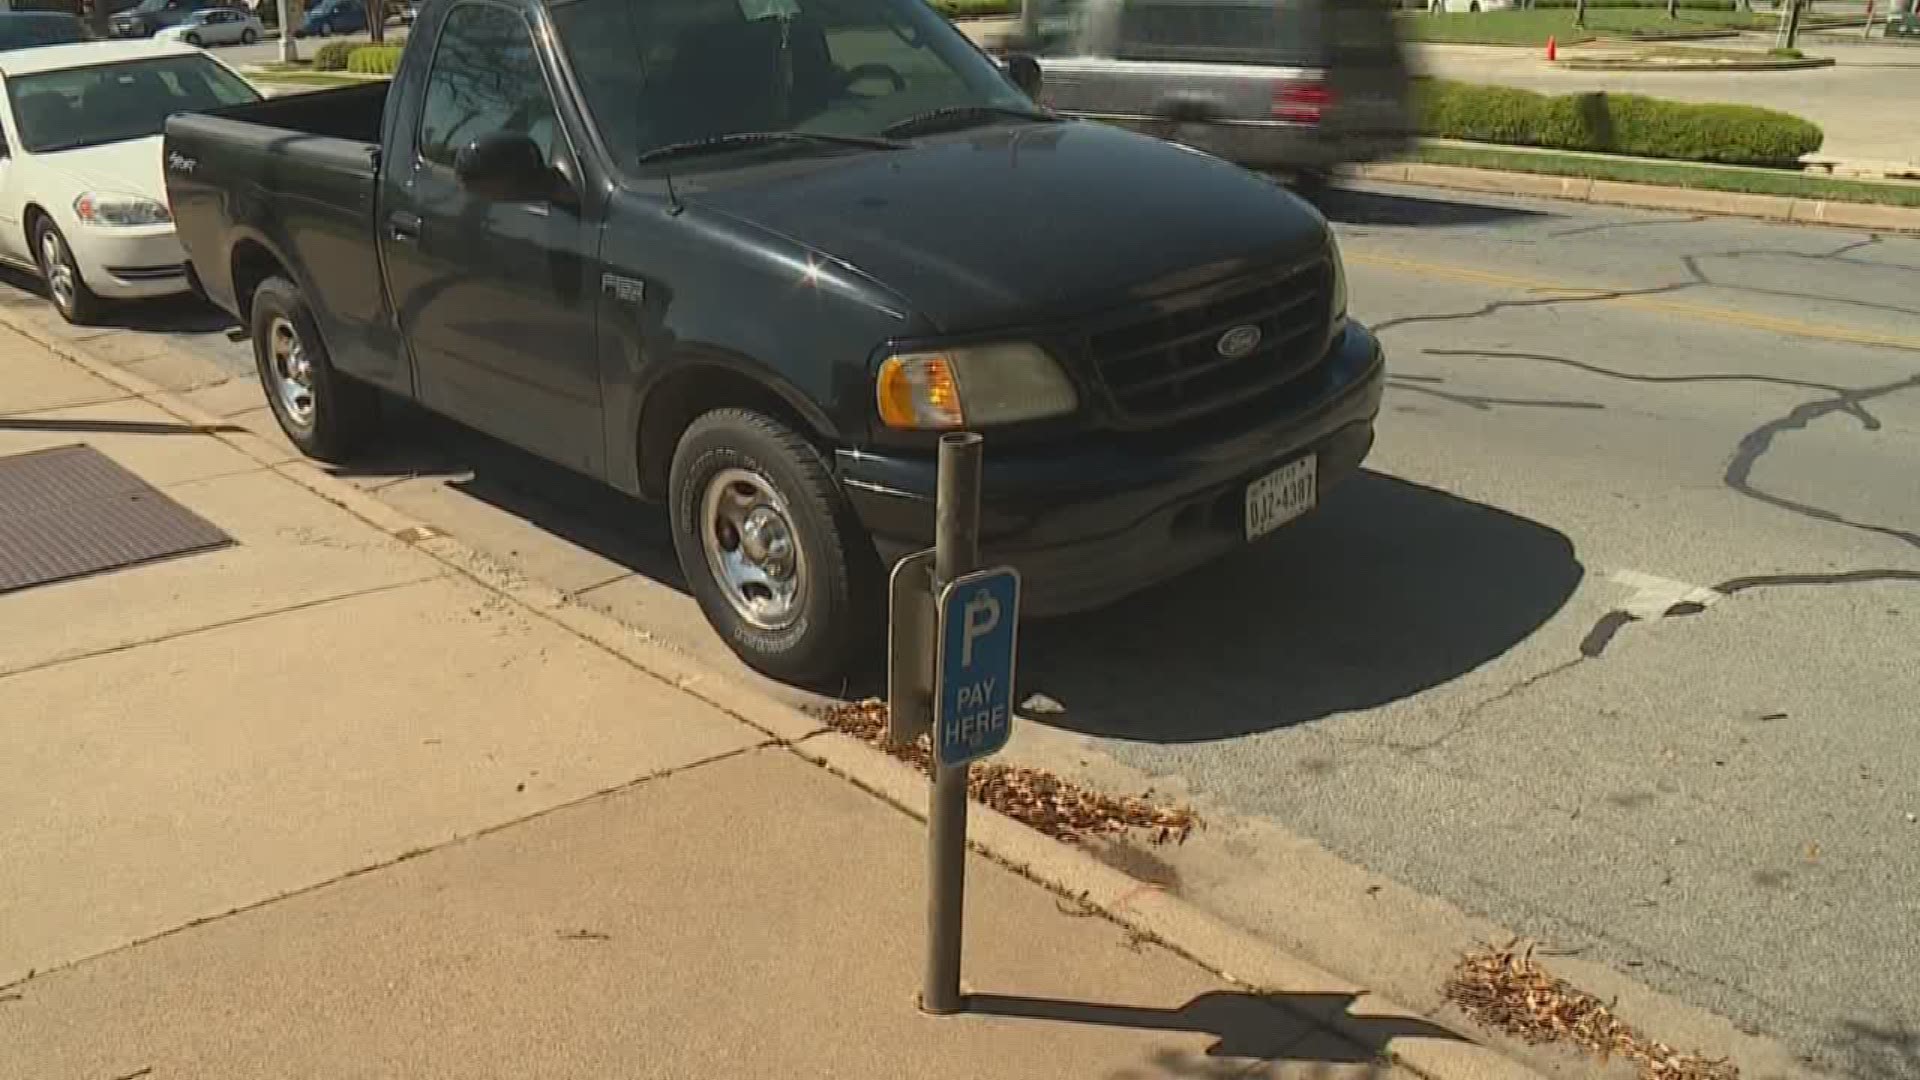 Fort Worth Police say at least 35 parking meters have been stolen in the city within the last month. Bradley Blackburn reports.